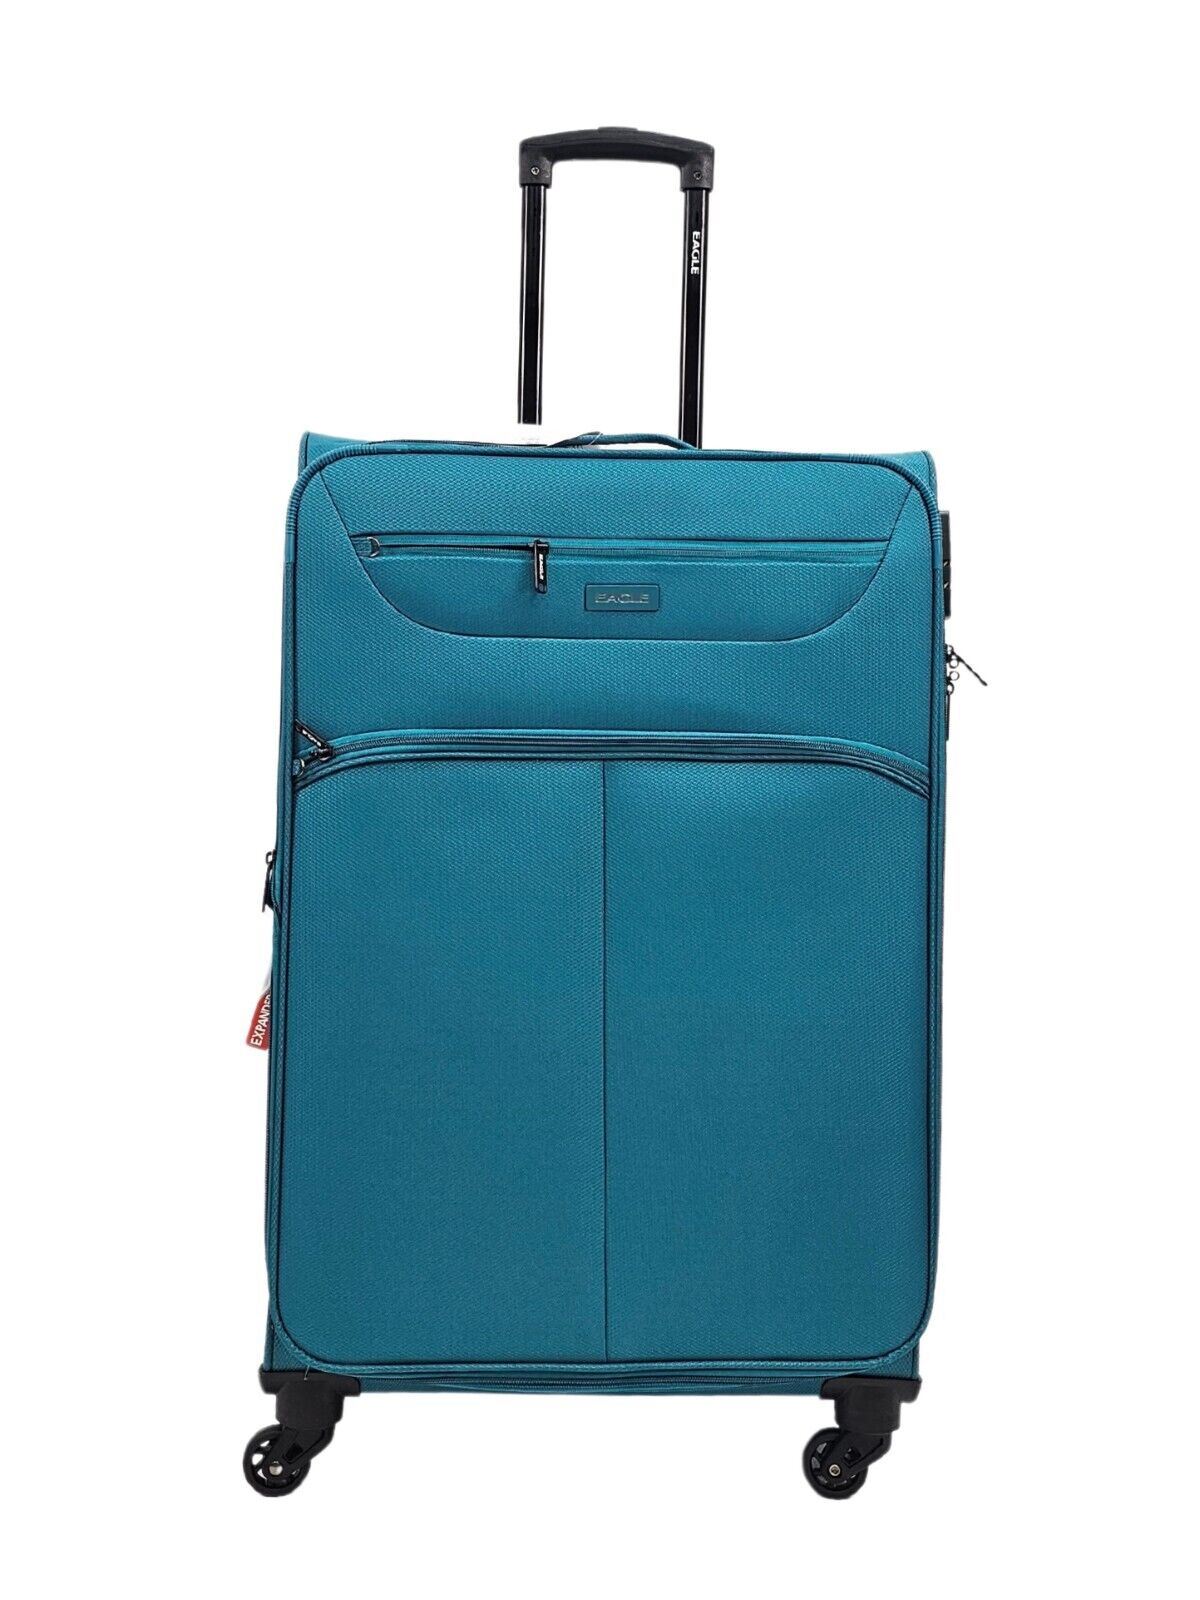 Baileyton Large Soft Shell Suitcase in Teal